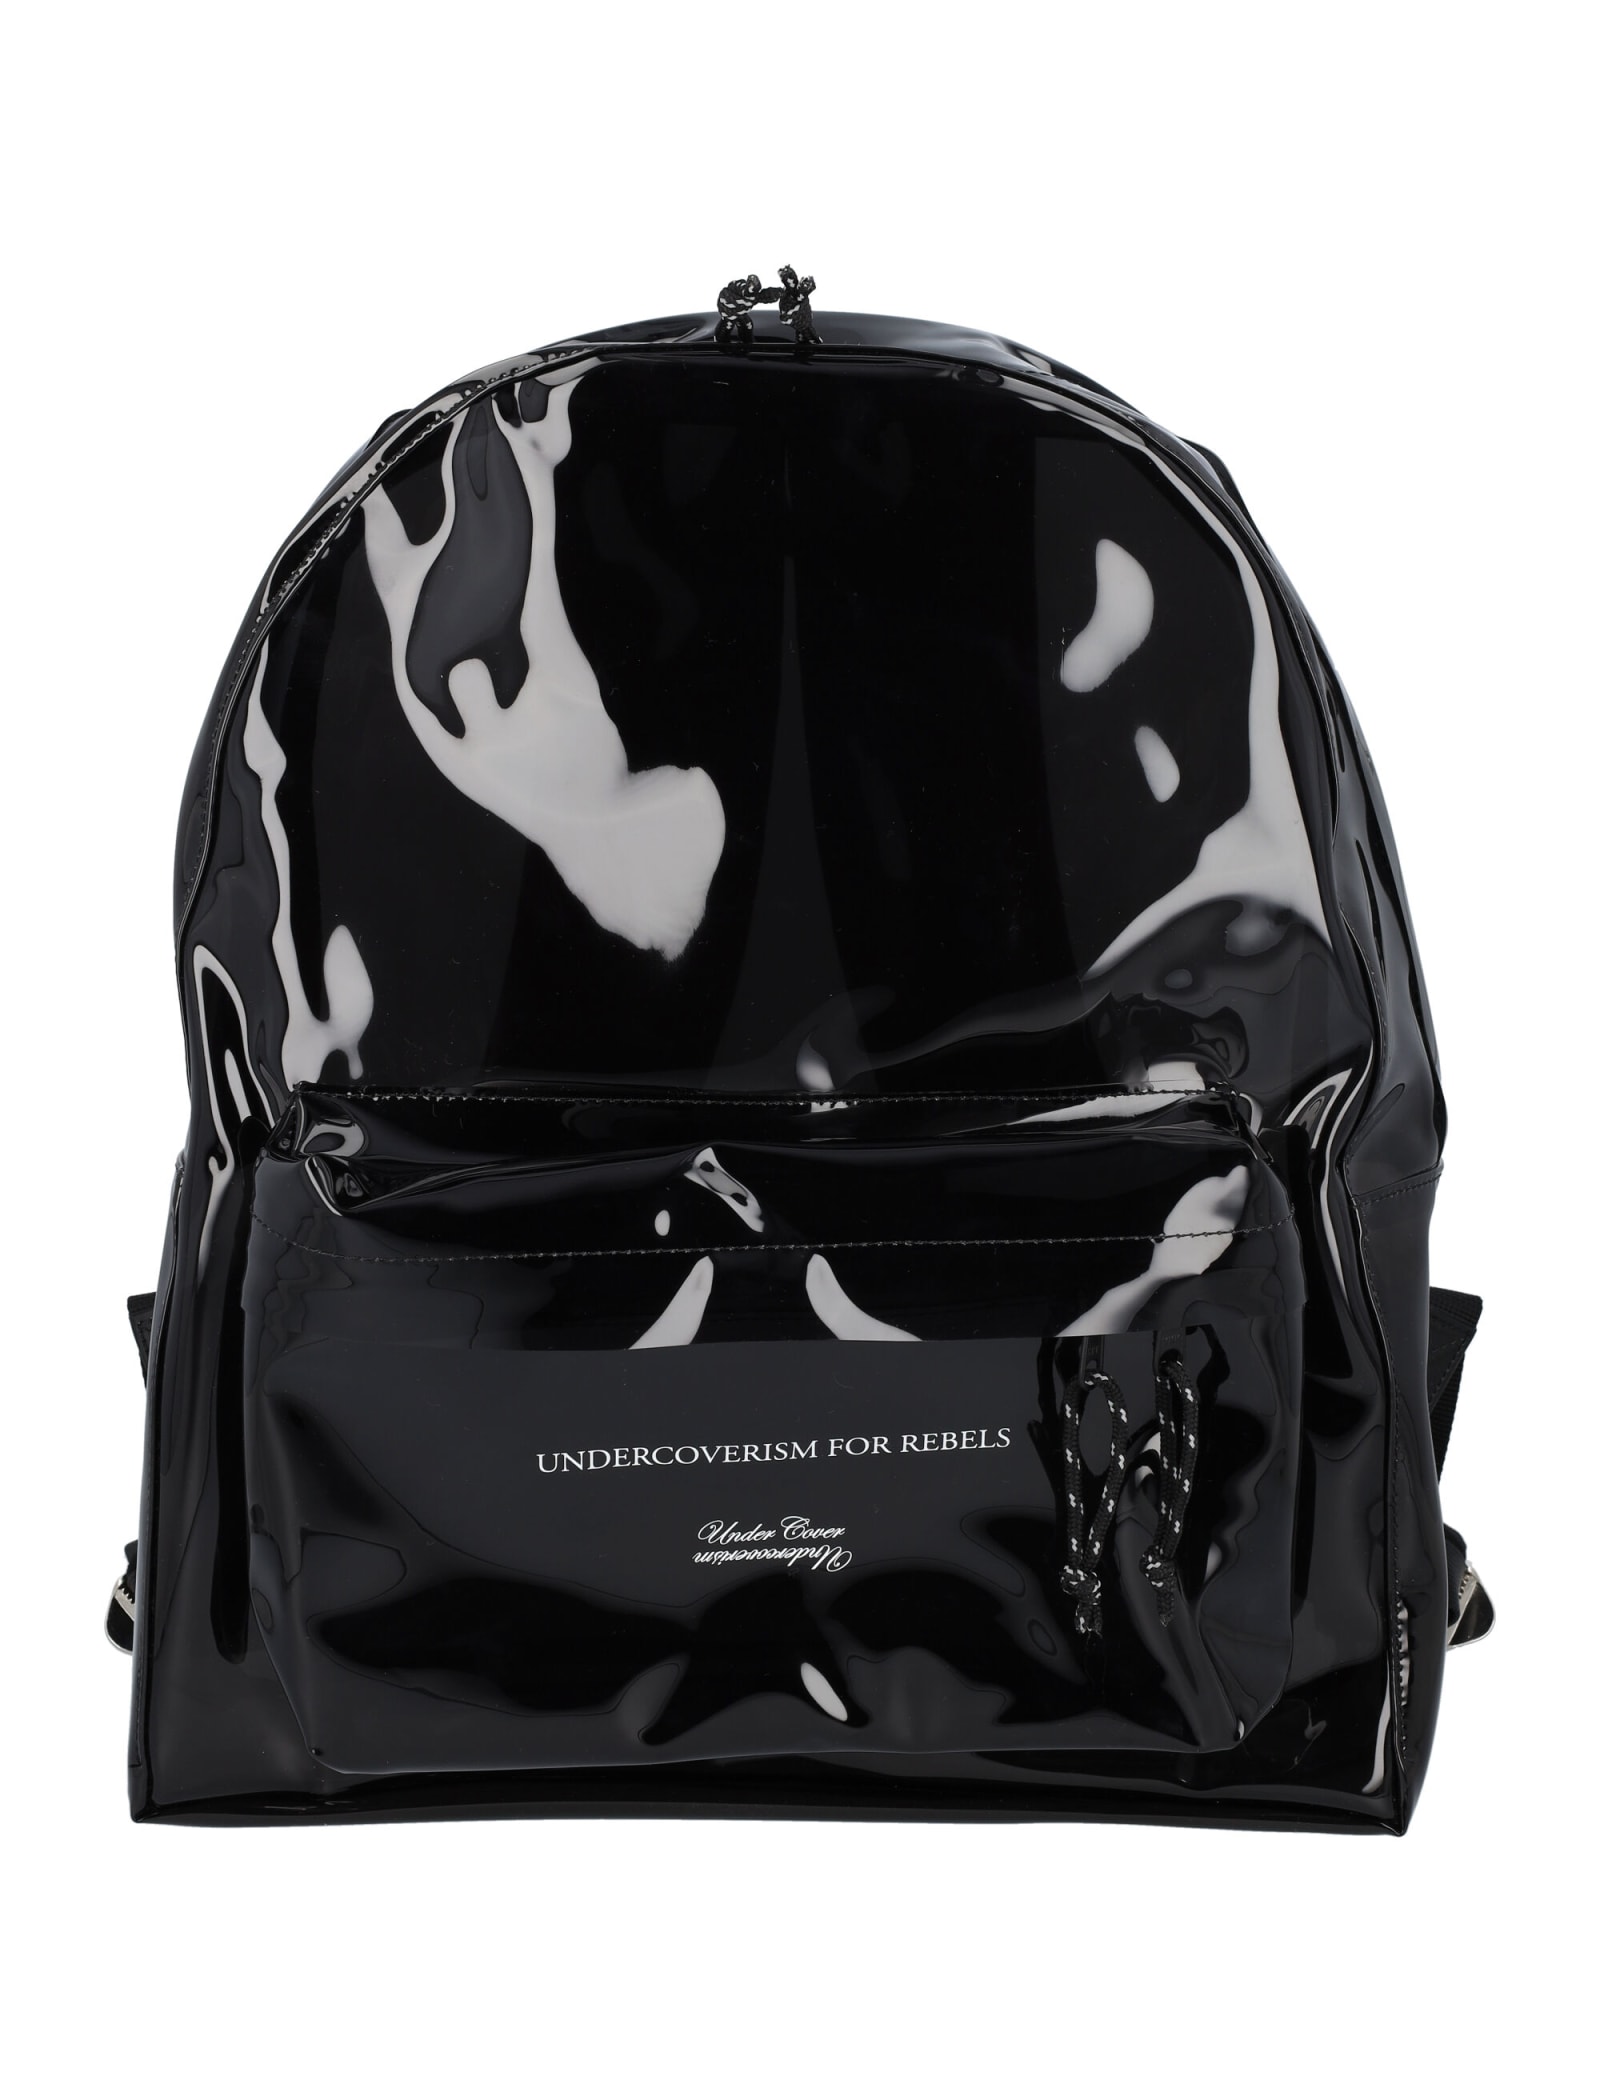 Undercover Jun Takahashi Undercover Pvc Backpack